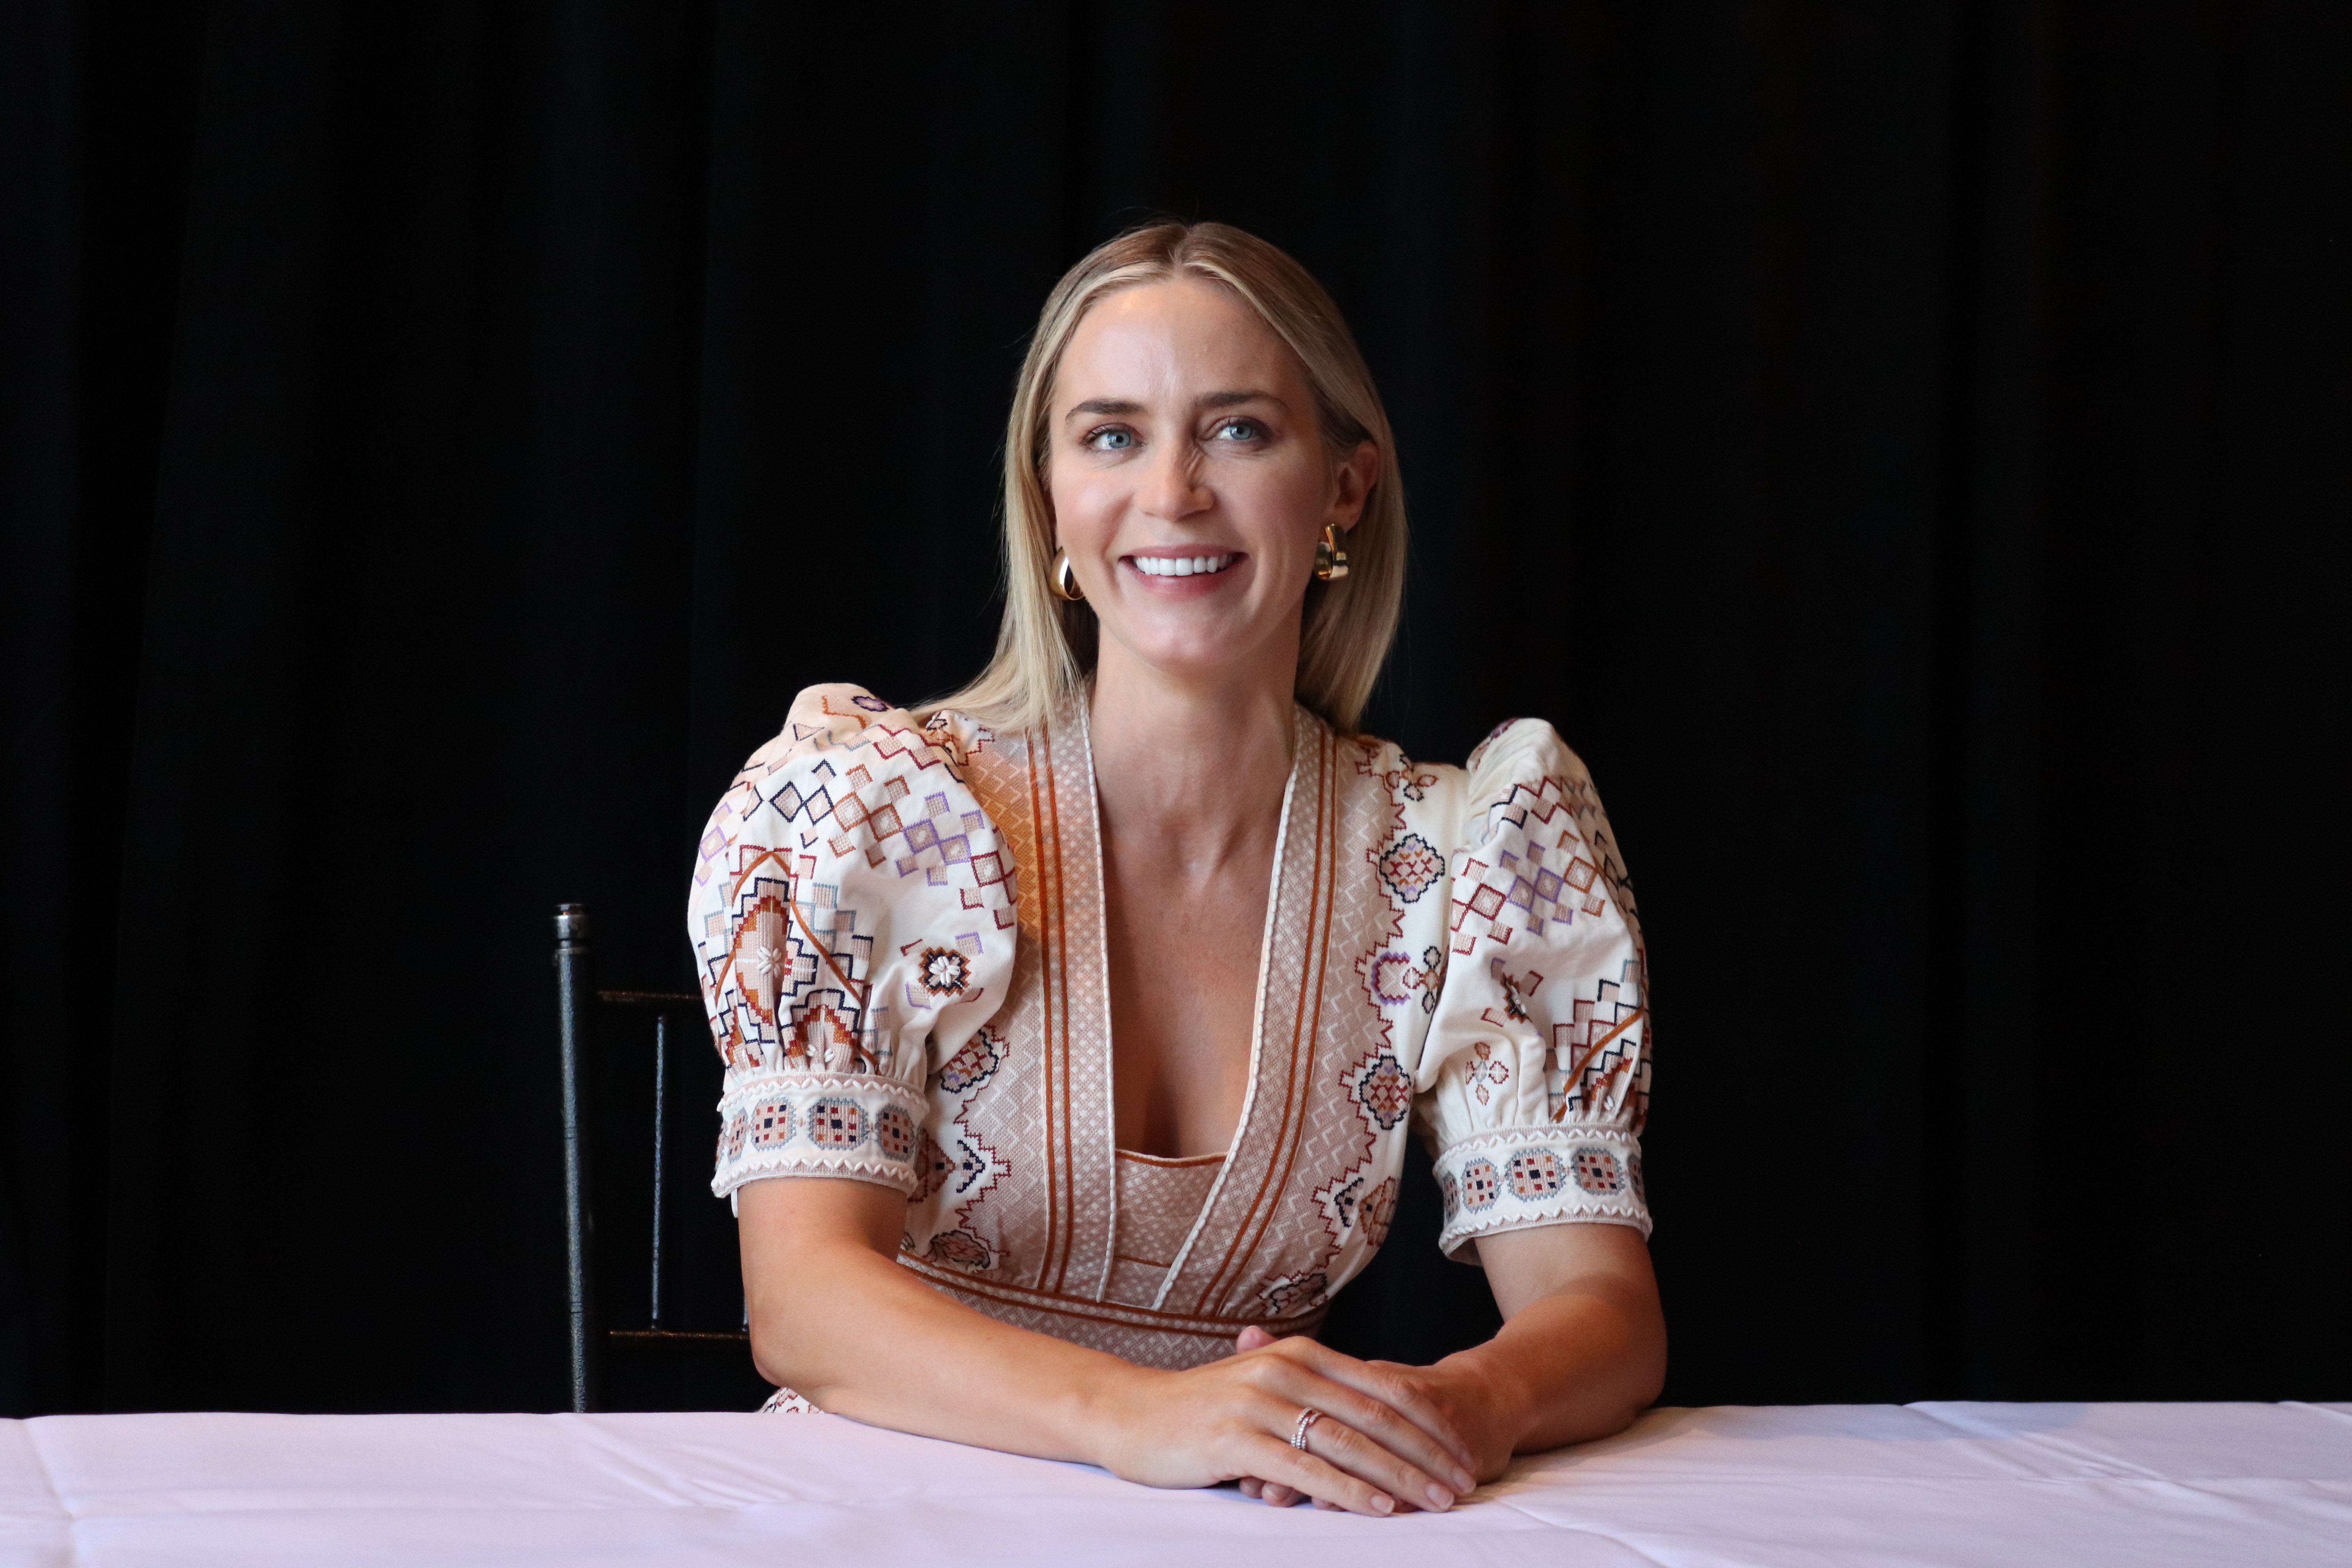 [Only IN Hollywood] Emily Blunt on success in love, work with John Krasinski